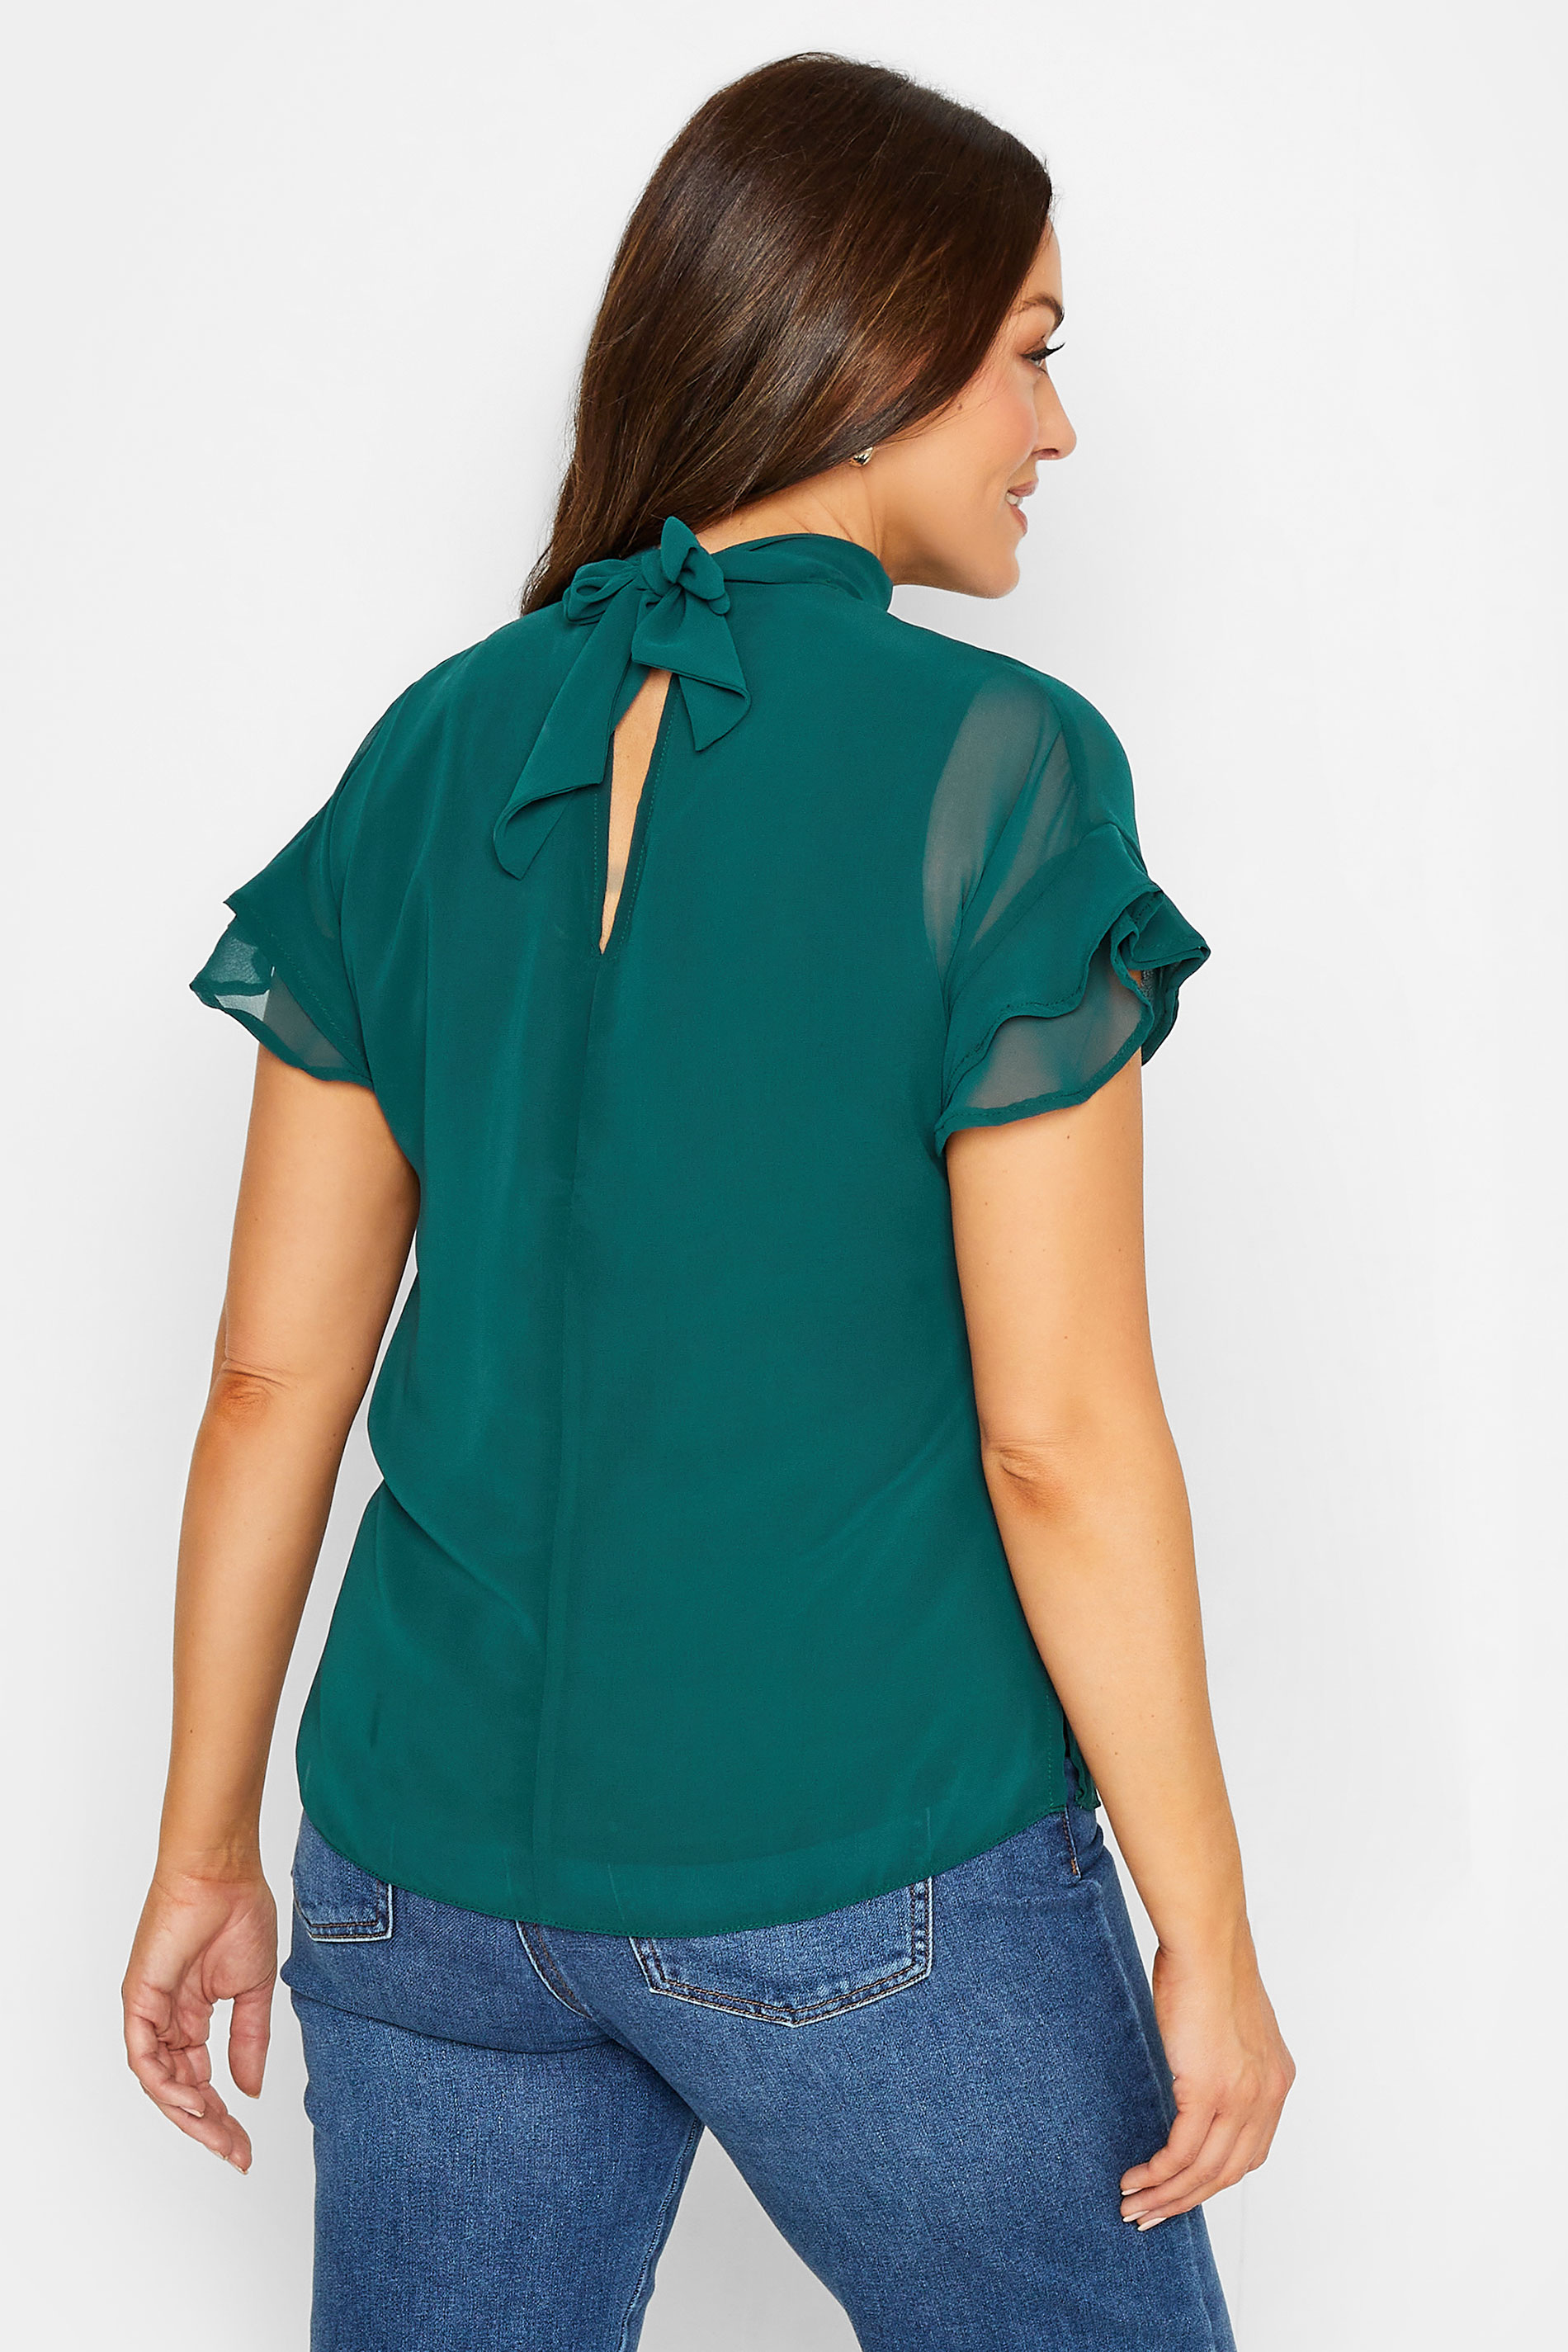 M&Co Green High Neck Frill Sleeve Blouse | M&Co 3